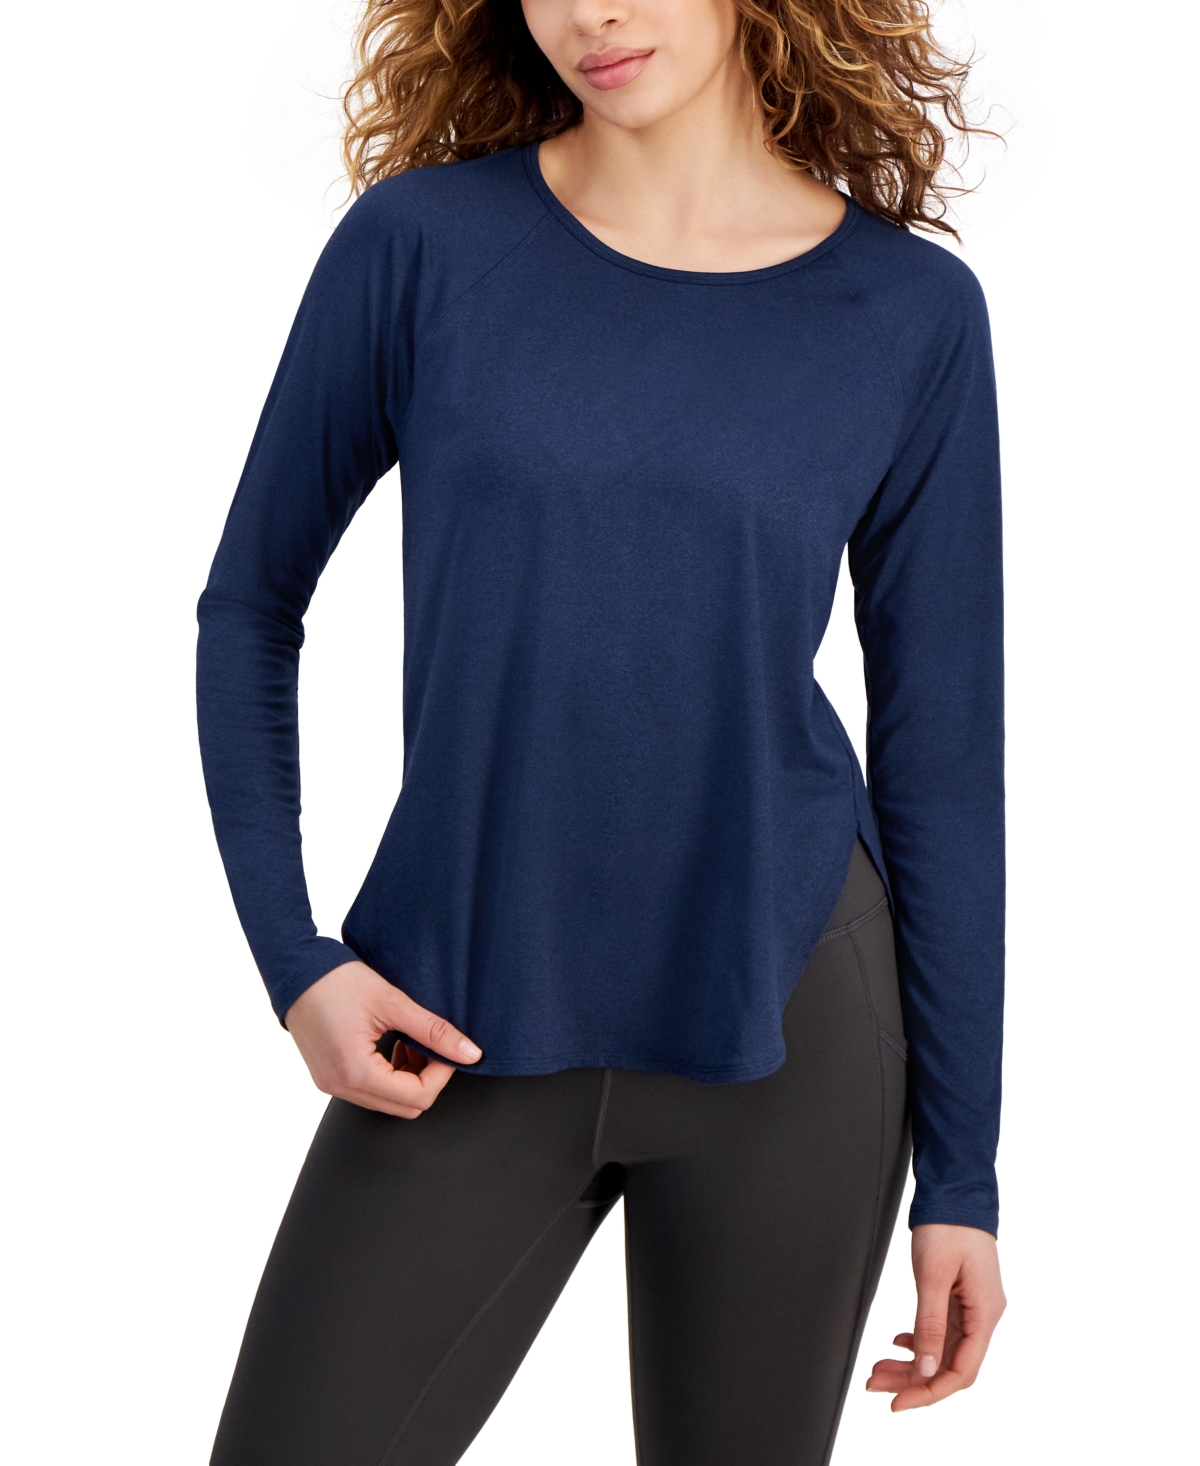 Women's Performance Long-Sleeve Top, Created for Macy's - Molten Pink